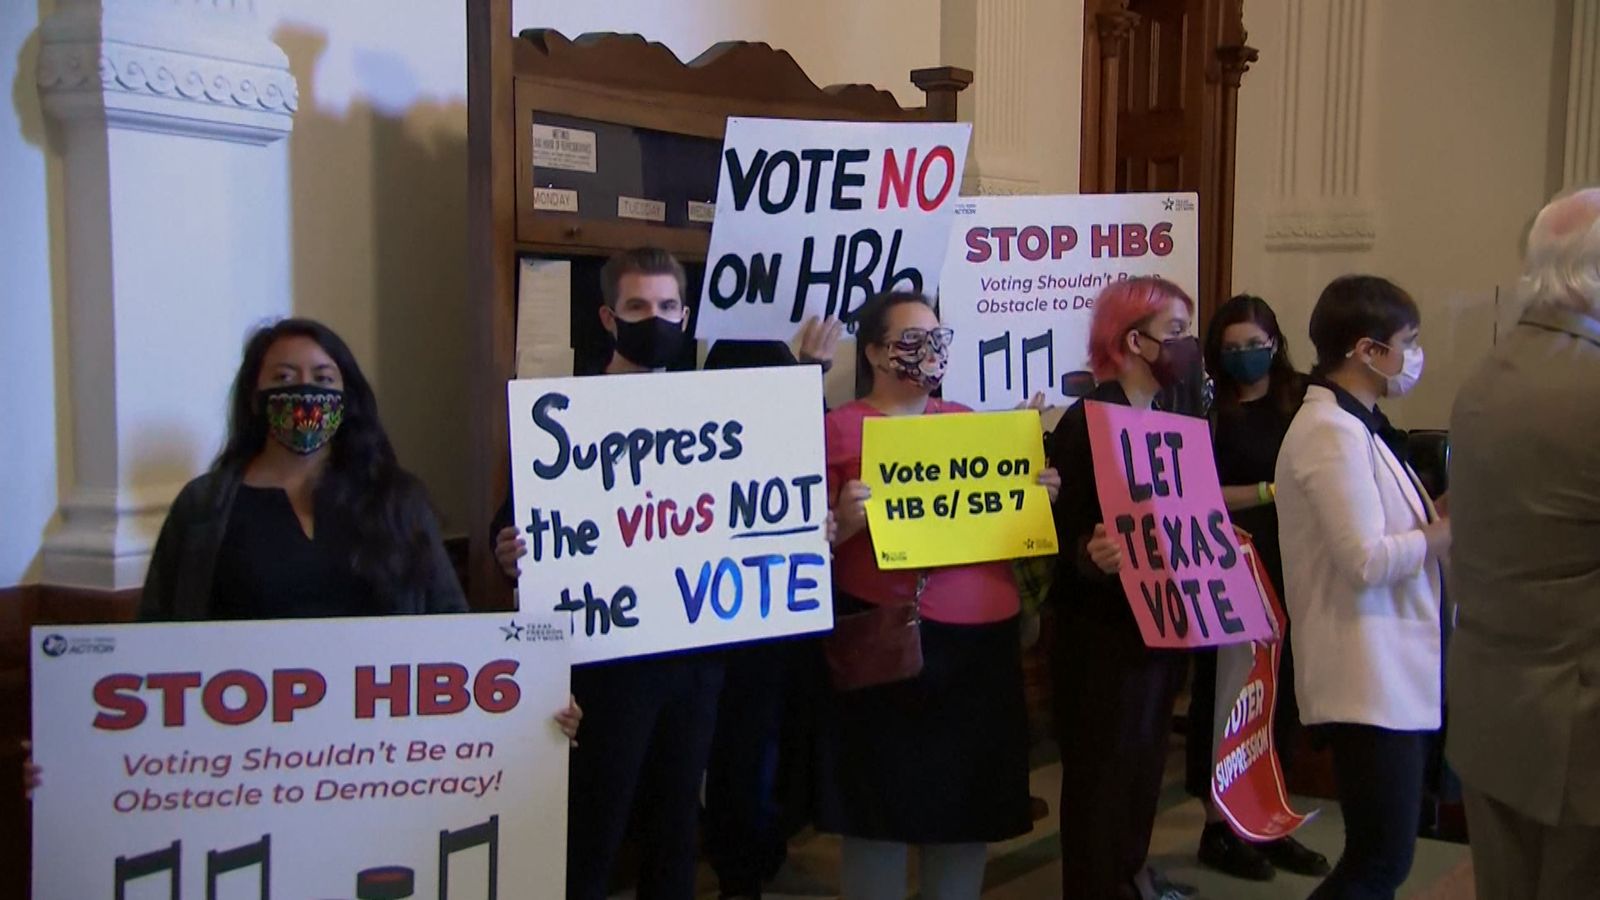 Texans protest new voting legislation which has been compared to Jim Crow laws that enforced segregation